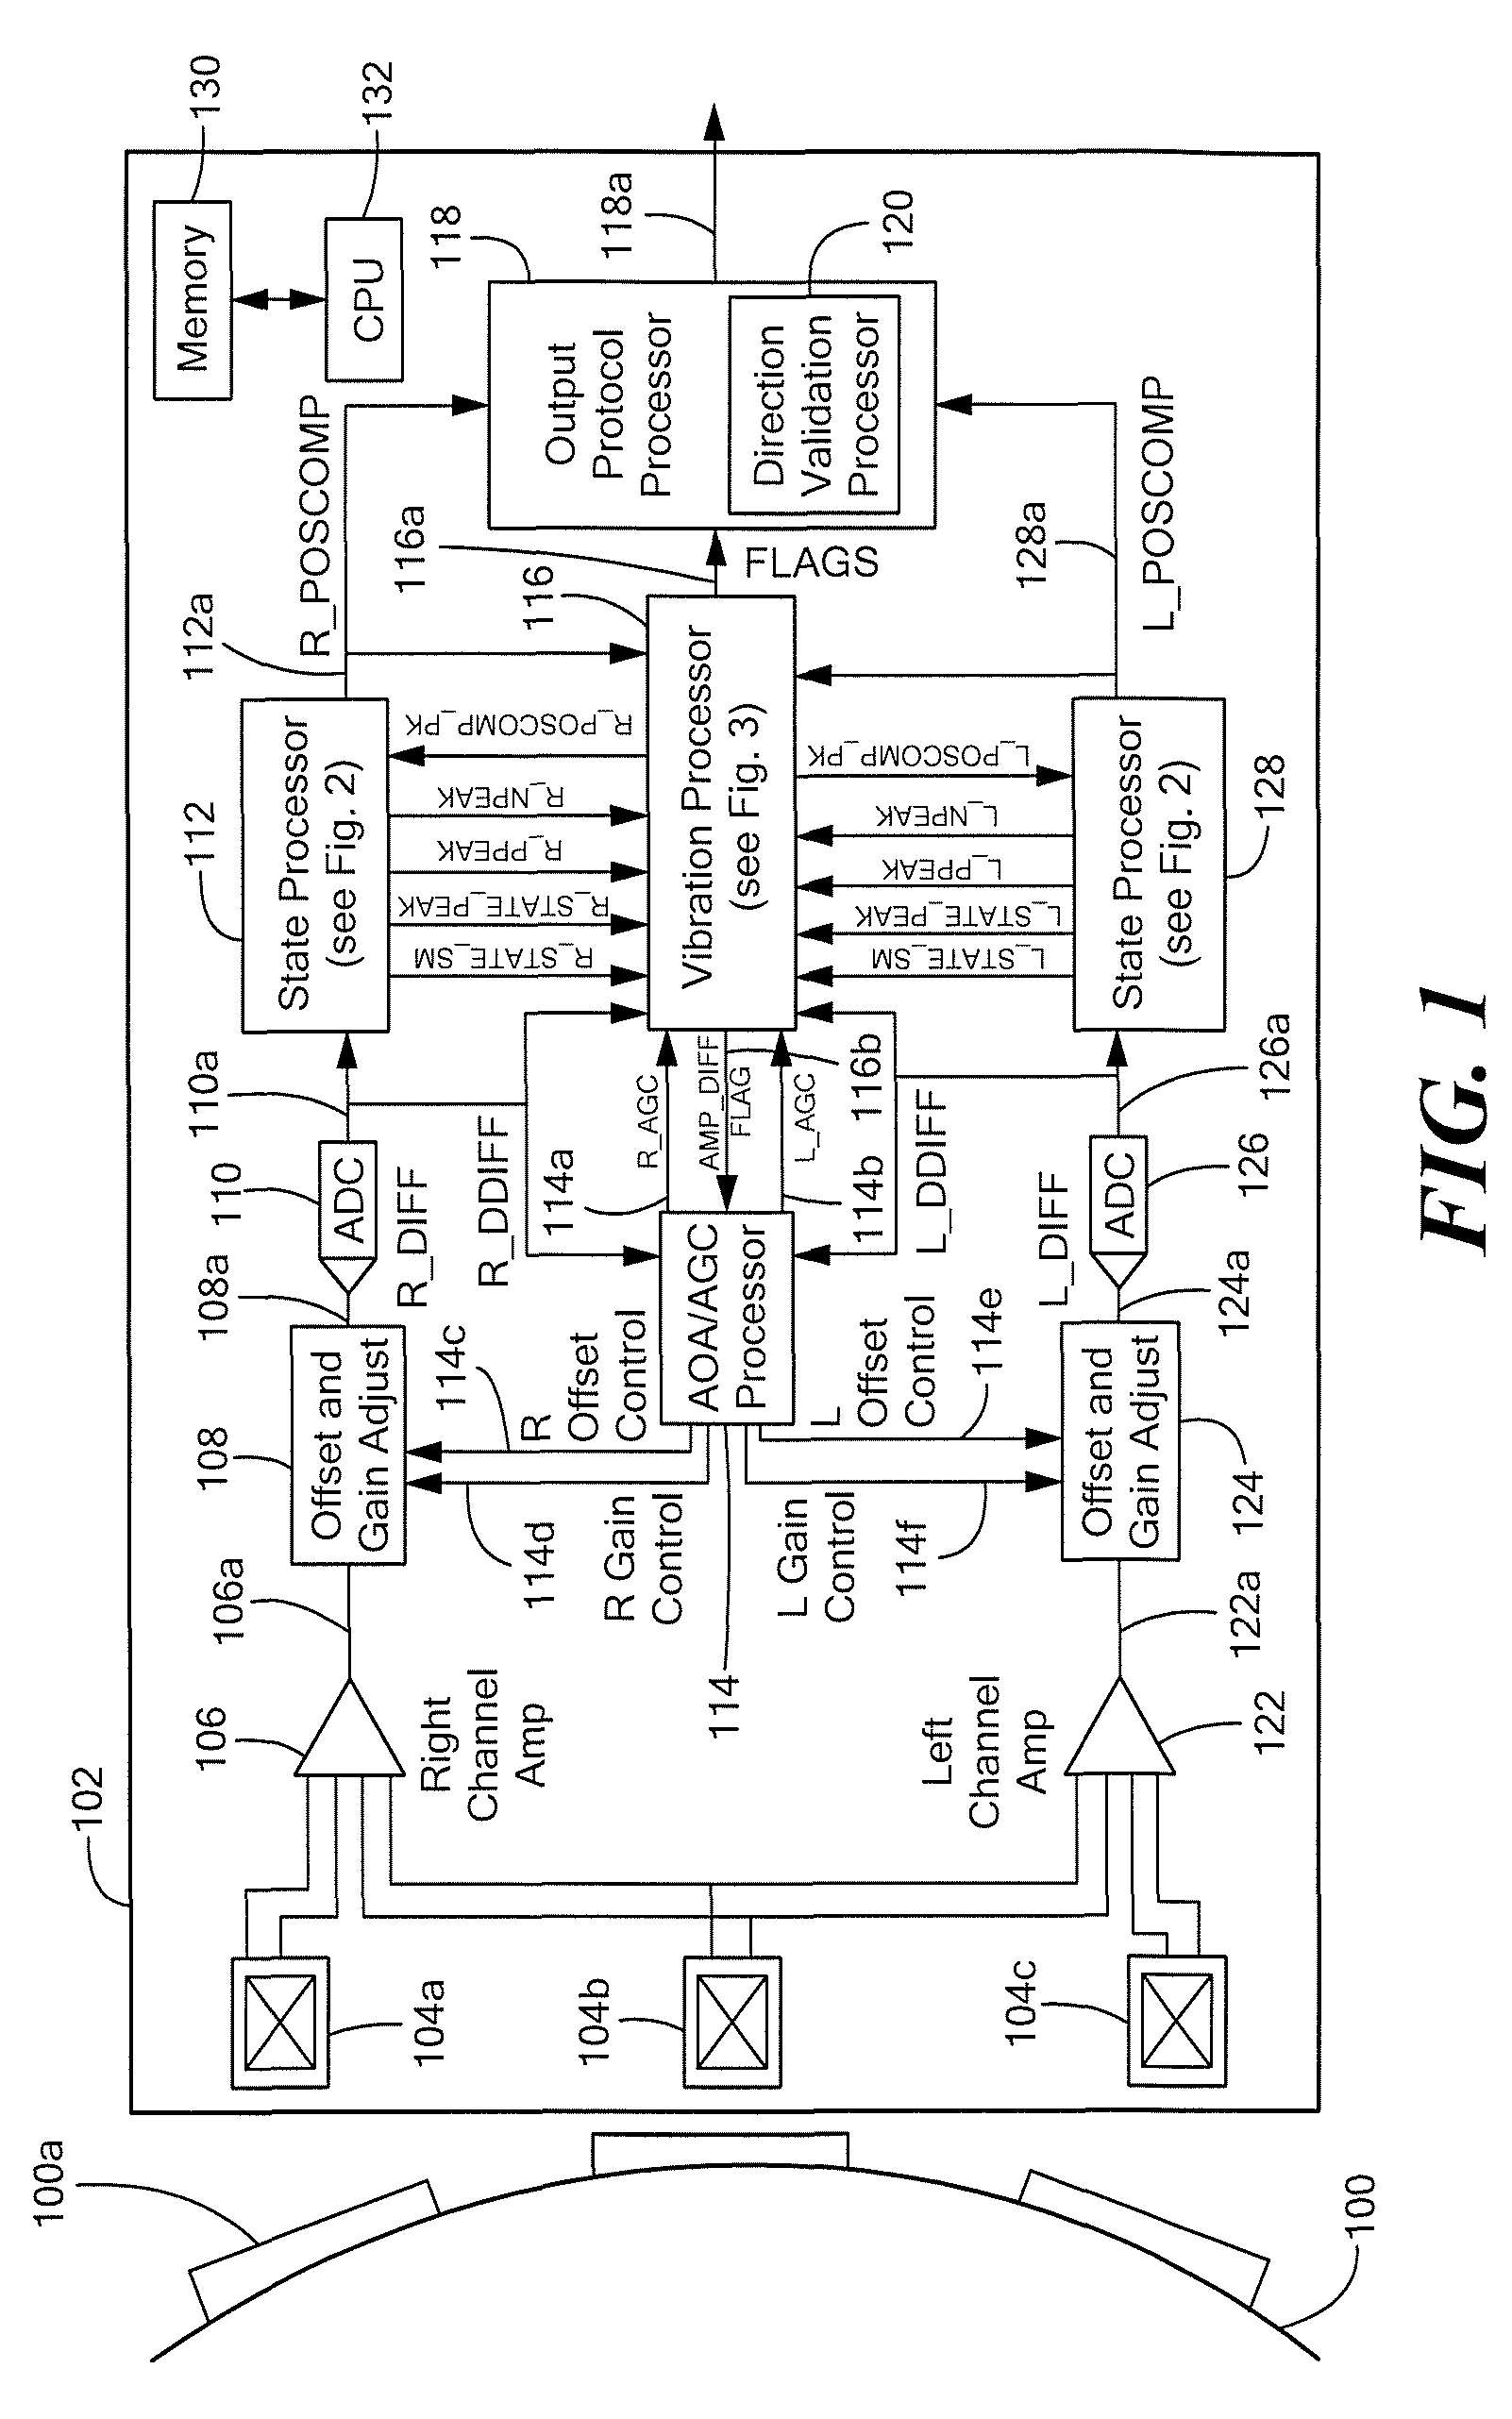 Motion sensor, method, and computer-readable storage medium providing a motion sensor with a magnetic field sensing element for generating a magnetic field signal and a state processor to identify a plurality of states corresponding to ranges of values of the magnetic field signal having a reduced amount of state chatter